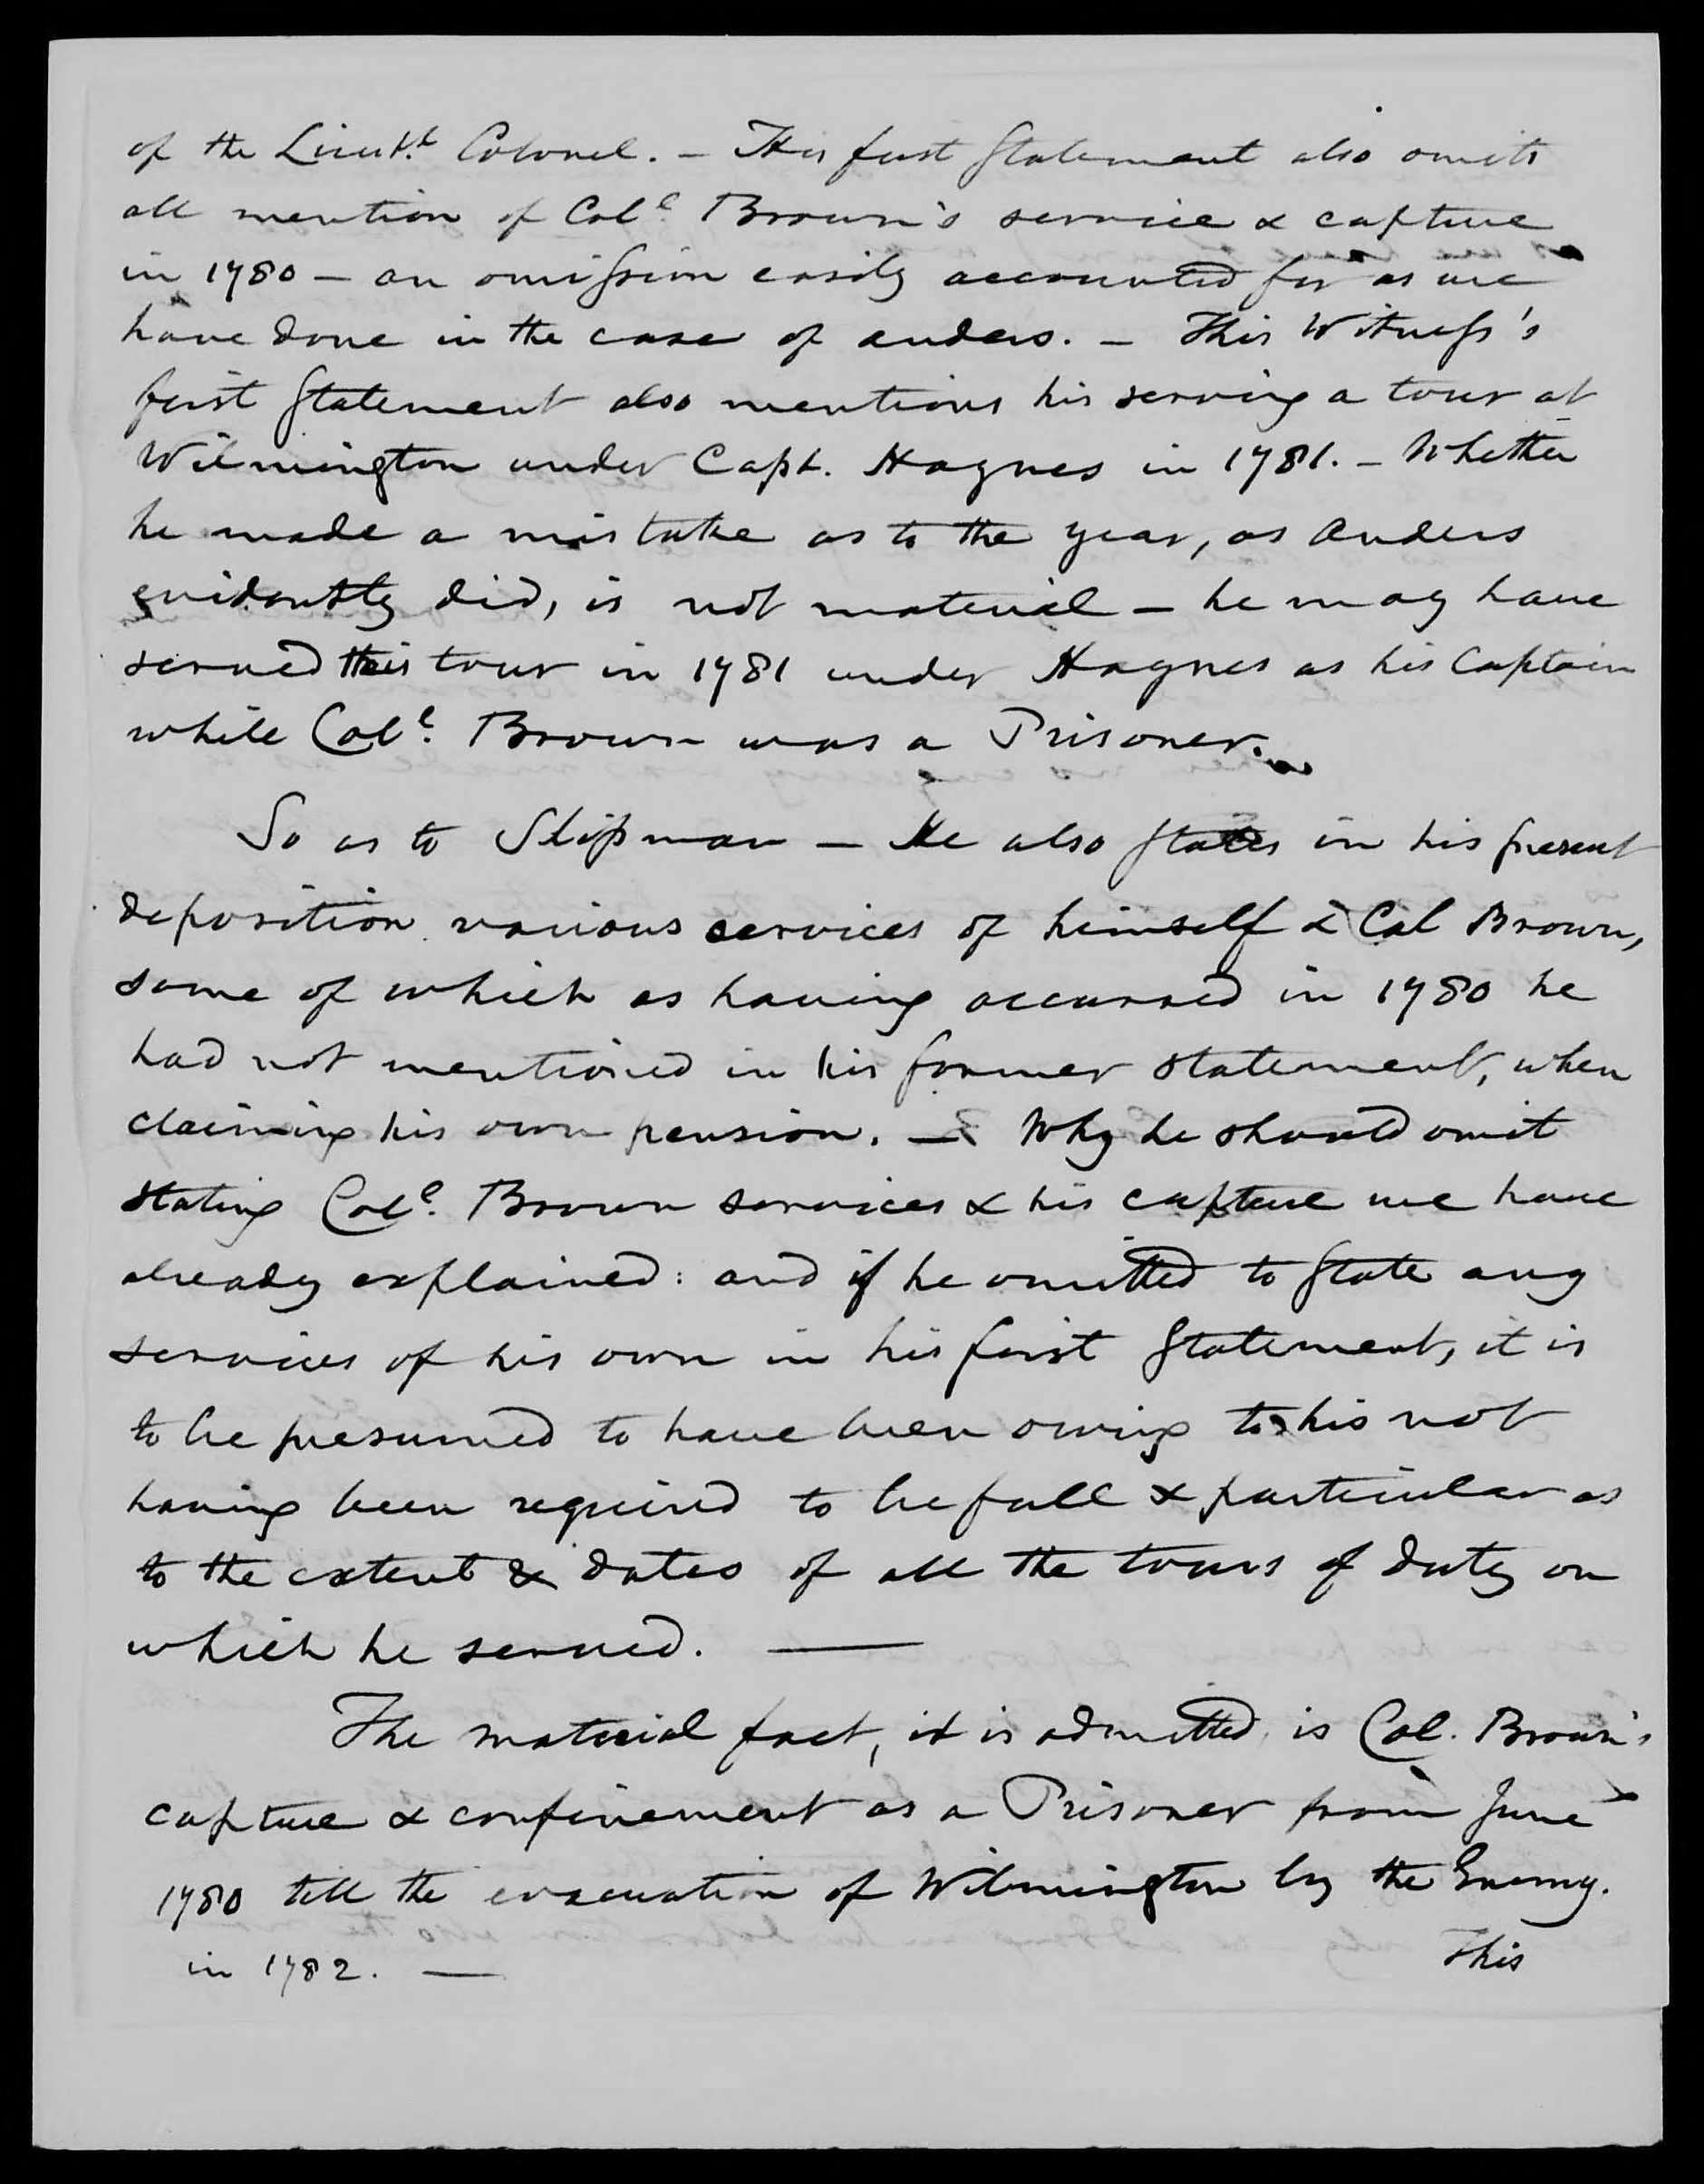 Letter from R. H. Mosby and Lucy Brown to the United States Pension Office, 19 June 1839, page 8 